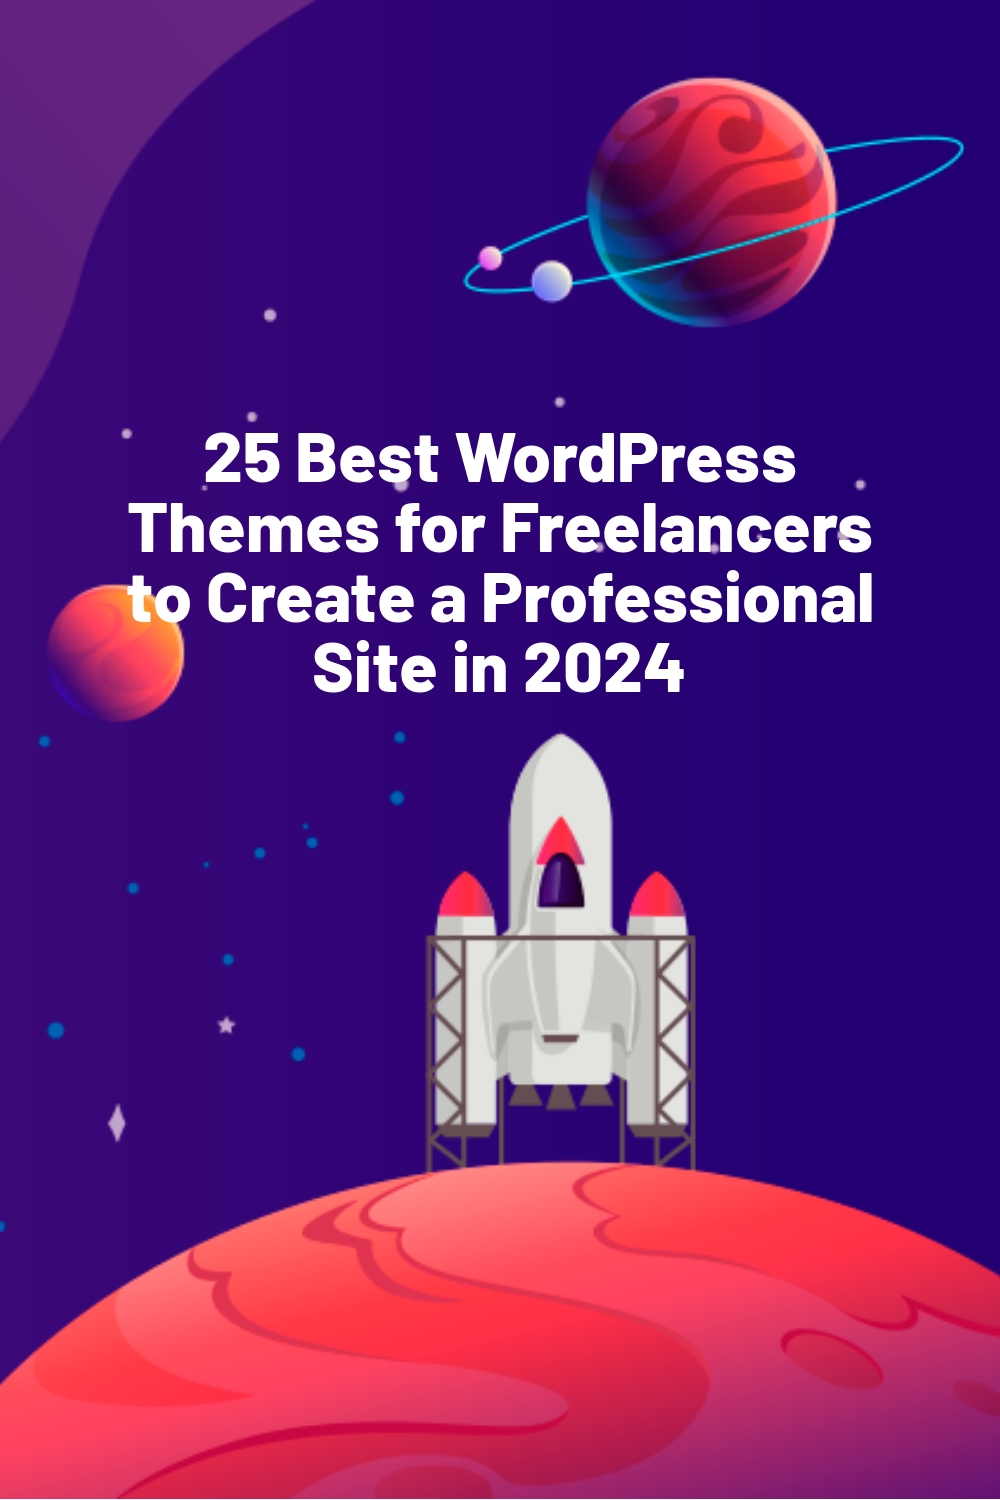 25 Best WordPress Themes for Freelancers to Create a Professional Site in 2024